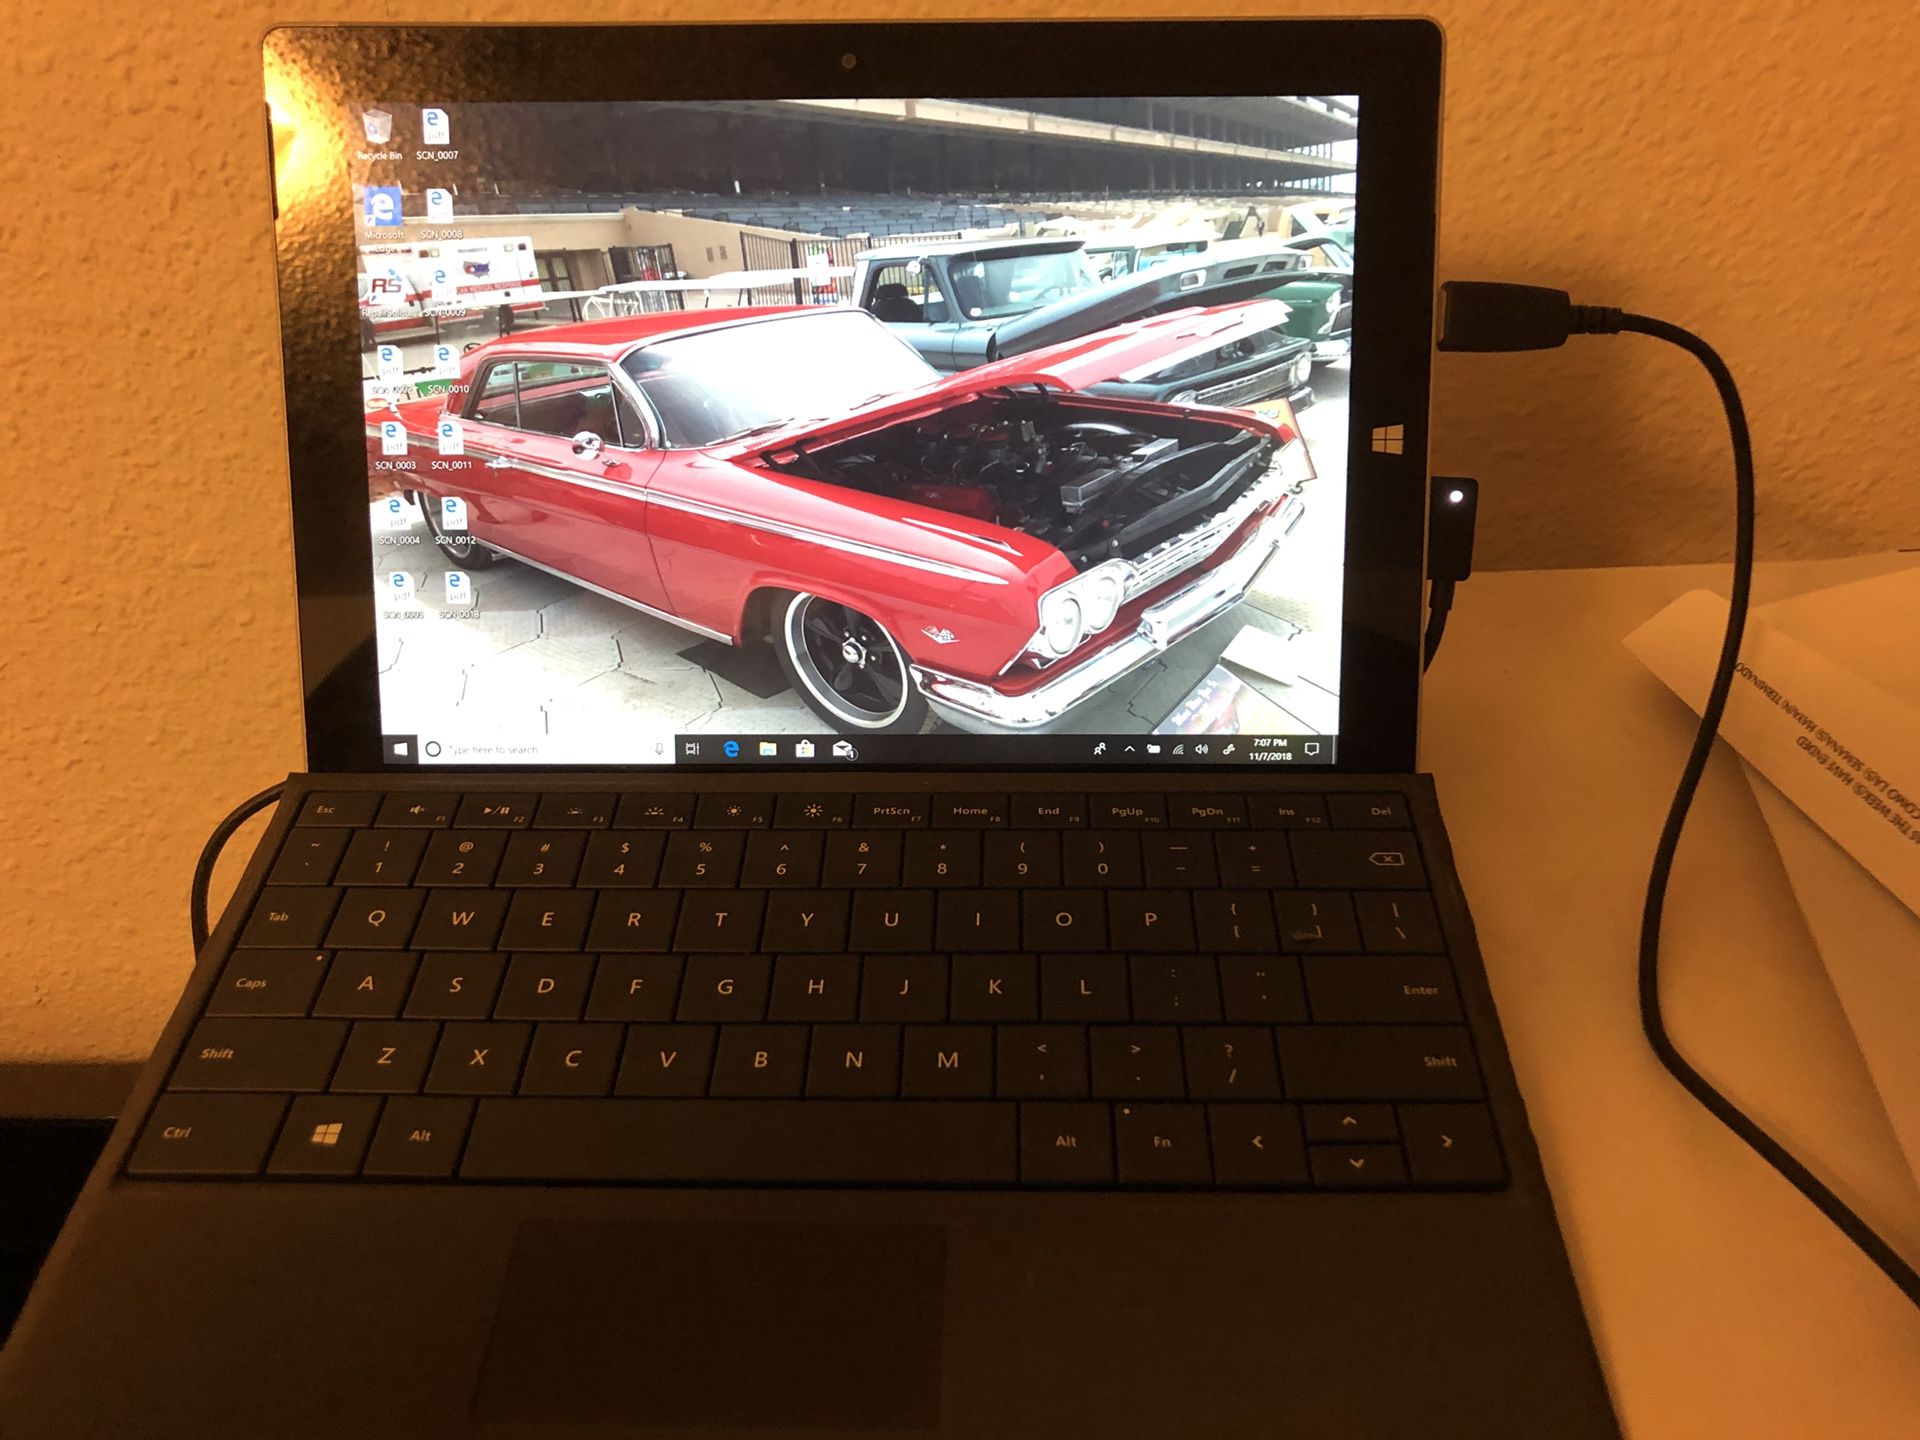 Microsoft surface 3 with key board original box and pen